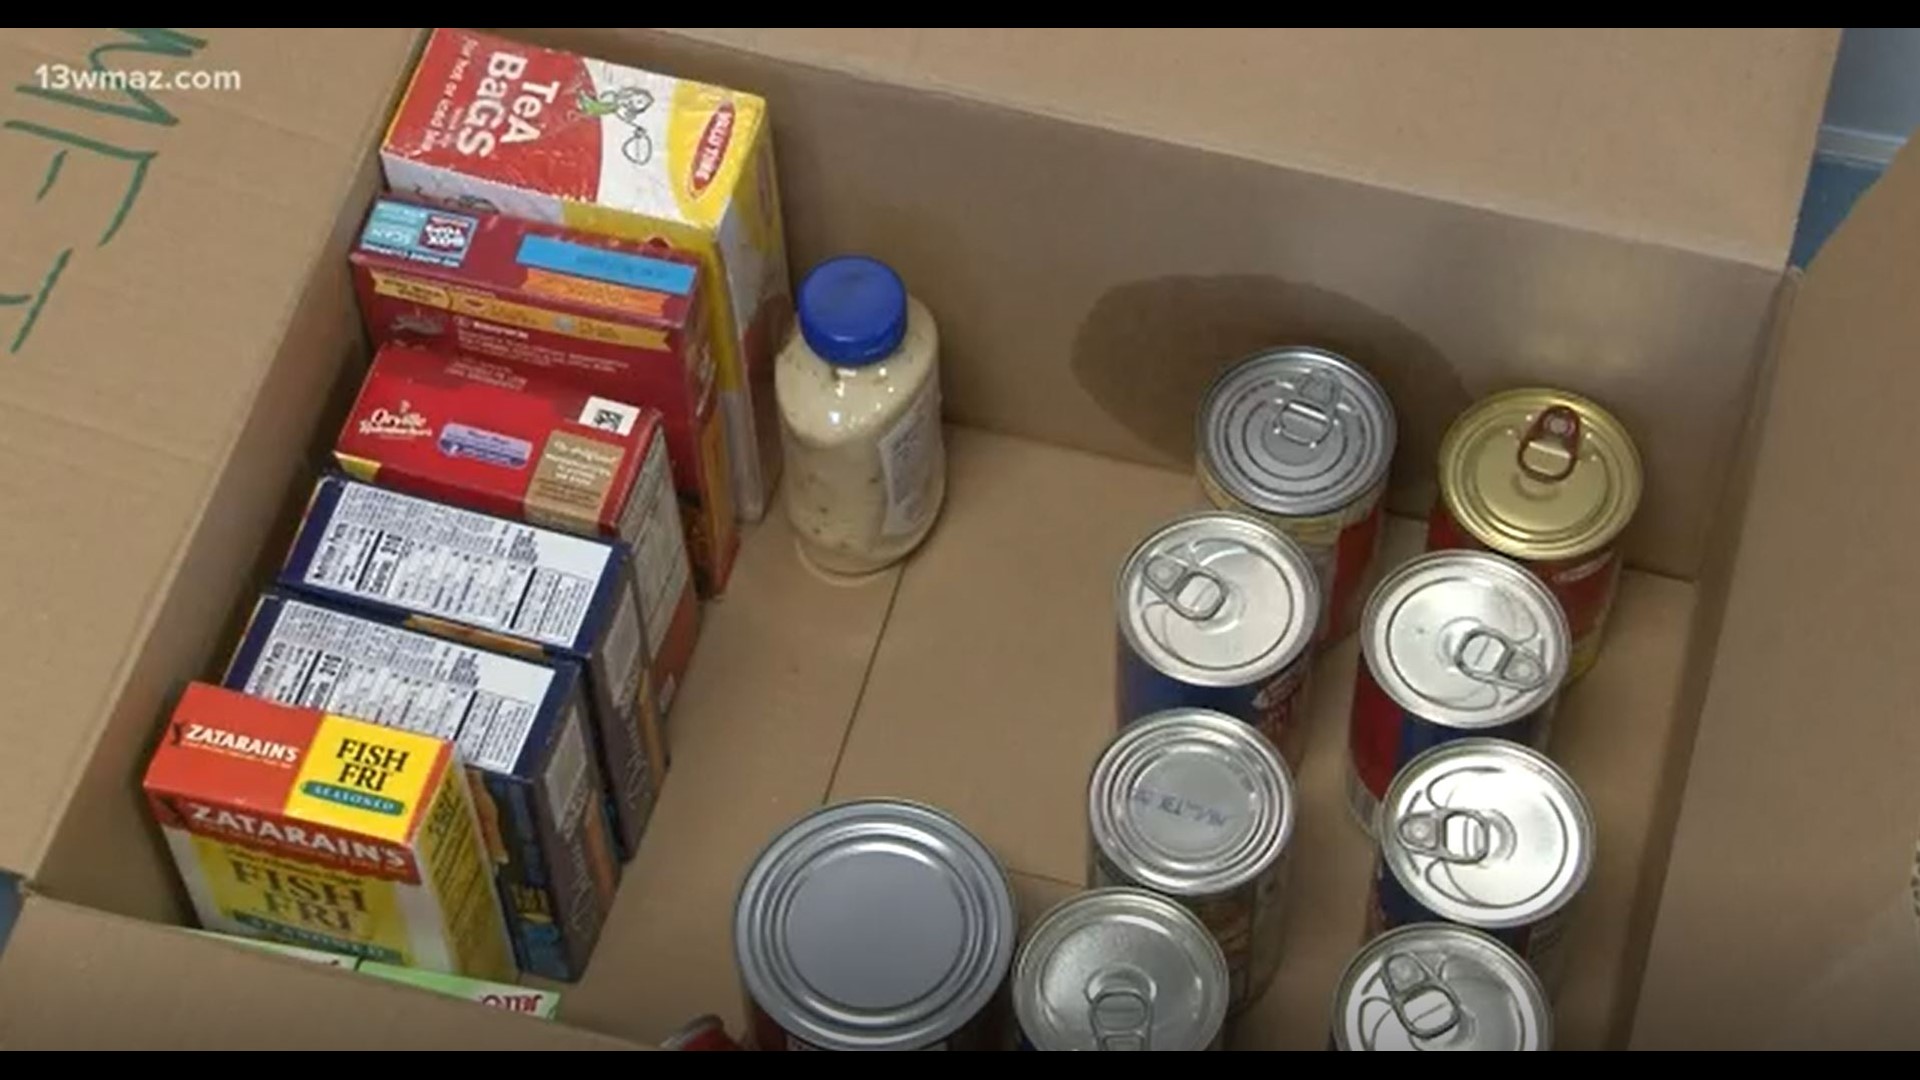 The youth are collecting goods and nonperishable items that will be donated to the Loaves & Fishes Ministry of Macon for the week of Thanksgiving.